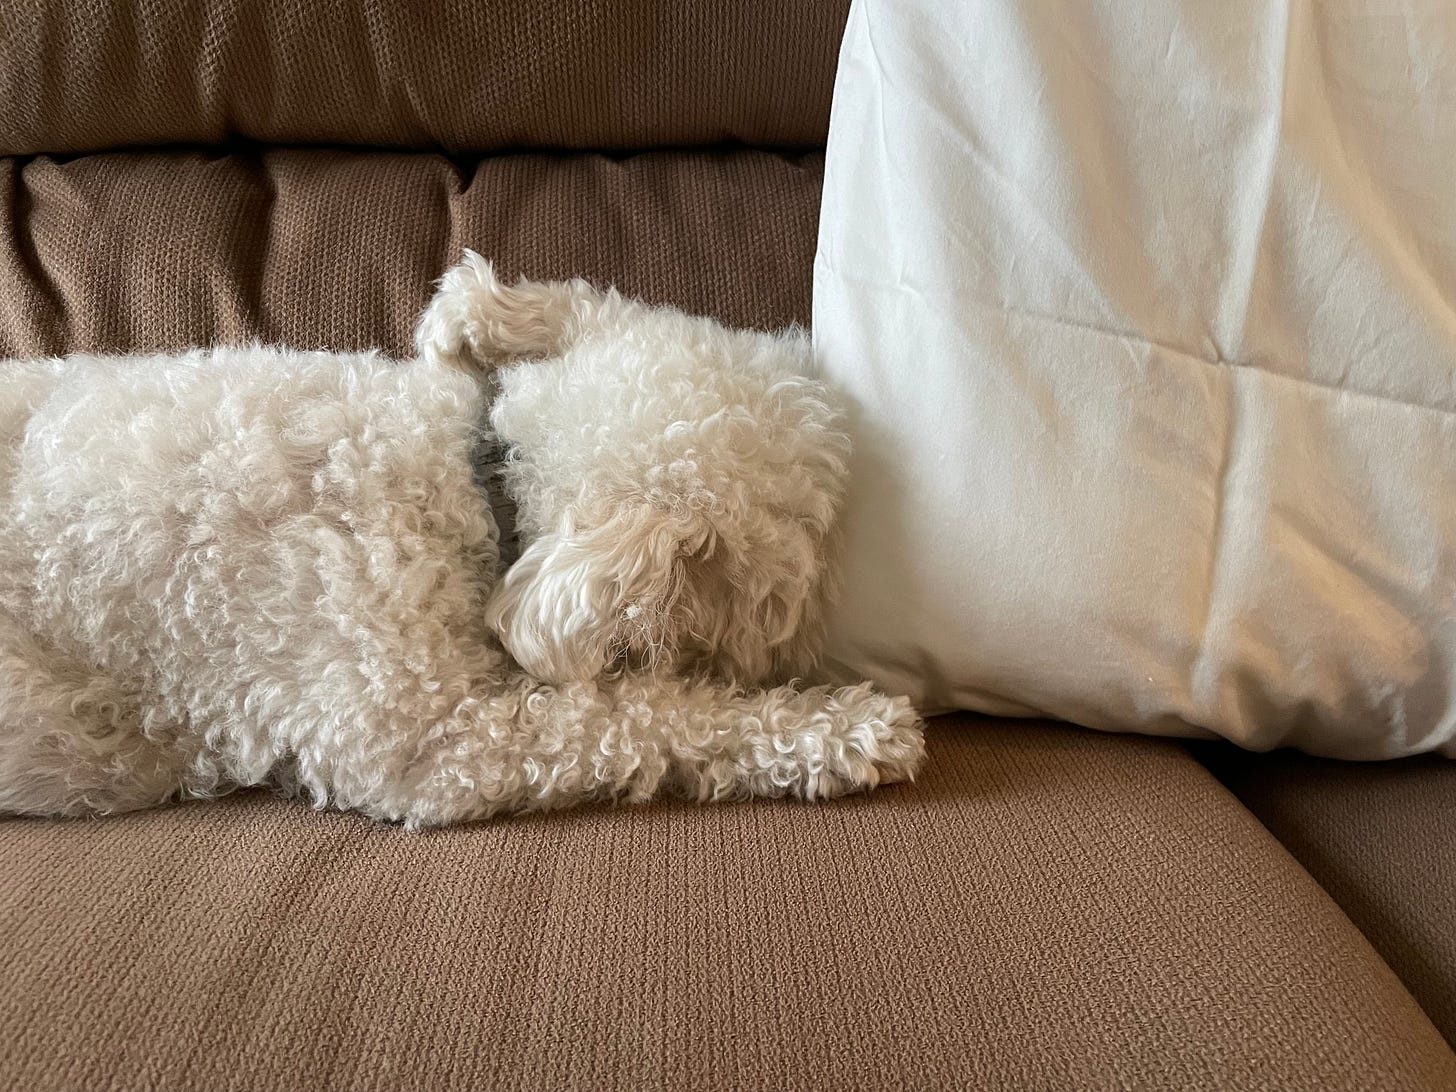 A white fluffy dog buries his head into the side of a white pillow. Both are atop a light brown couch.